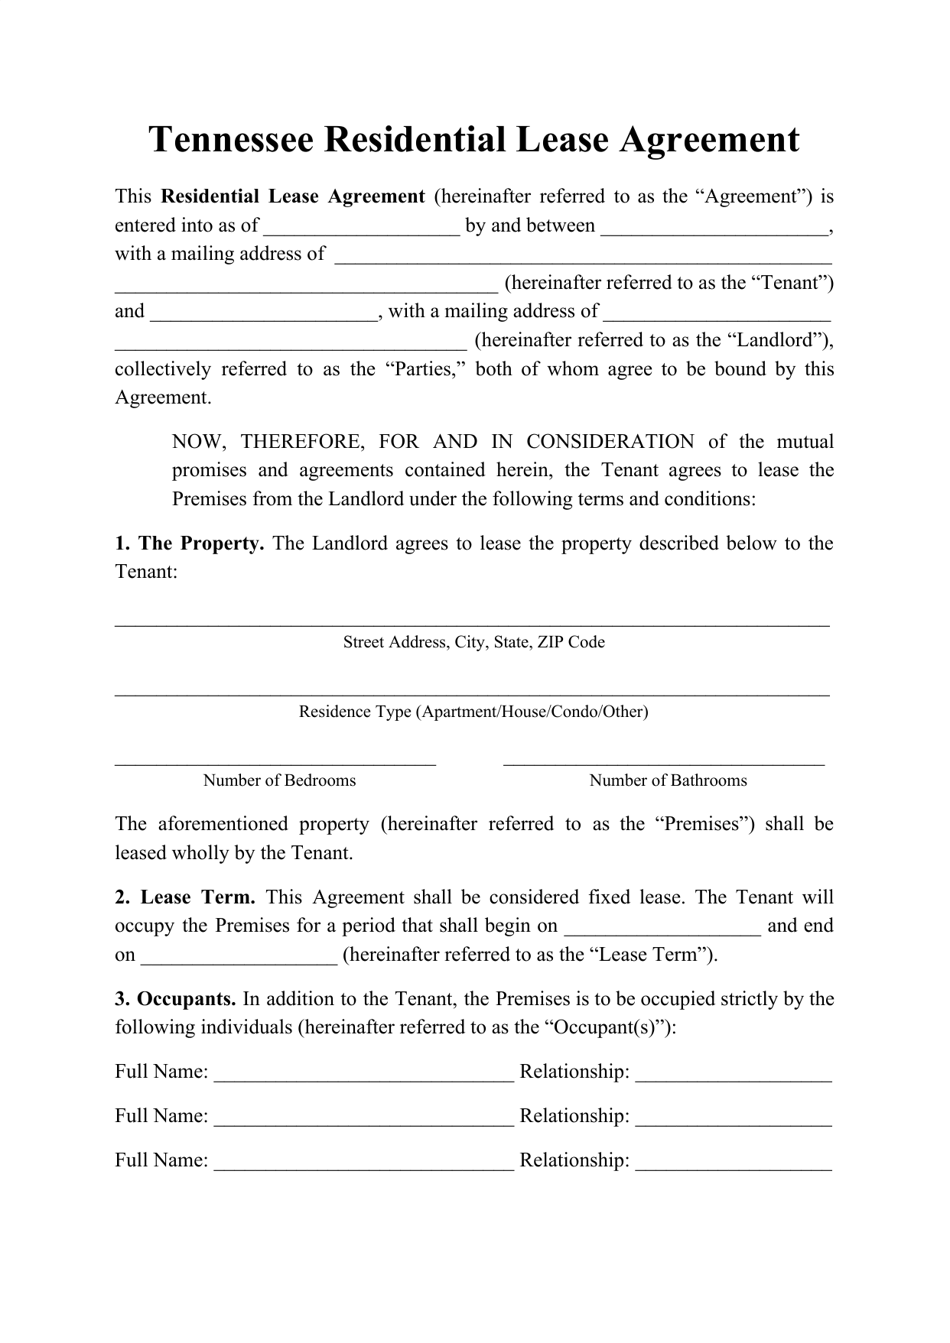 tennessee-residential-lease-agreement-template-fill-out-sign-online-and-download-pdf